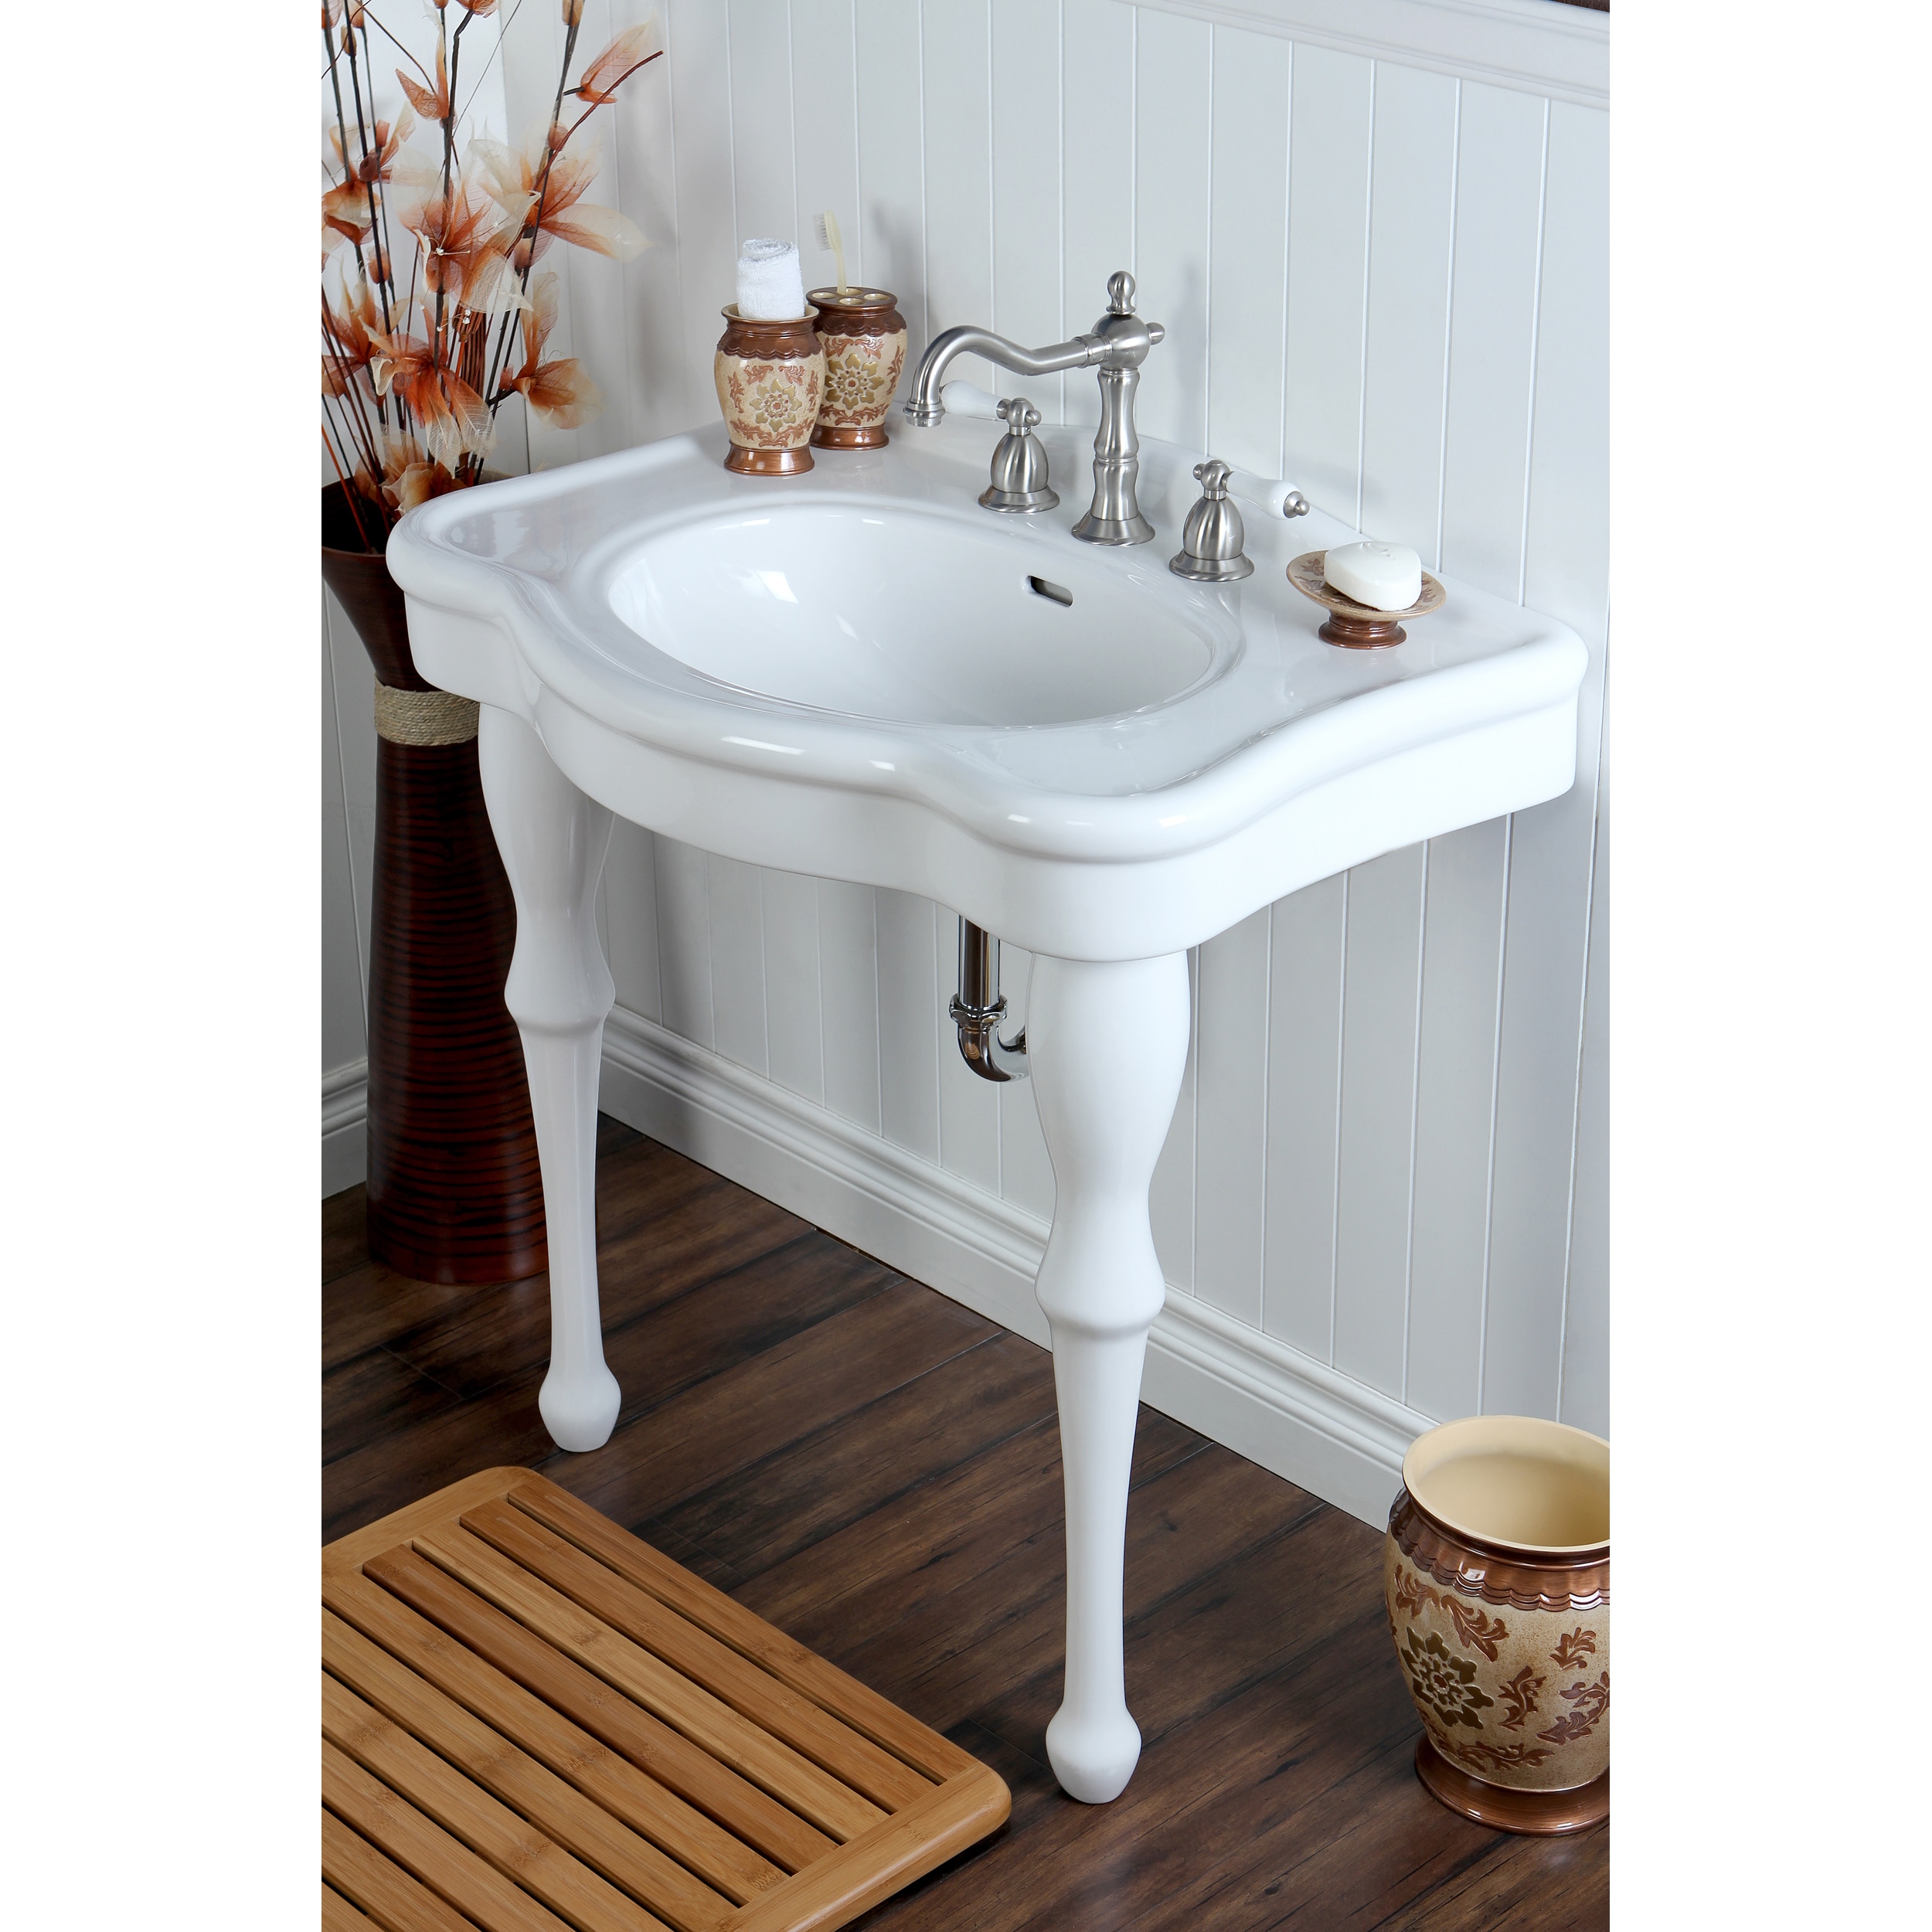 Vintage White China 32 Inch Wall Mount Bathroom Vanity Sink On Sale Overstock 8036002